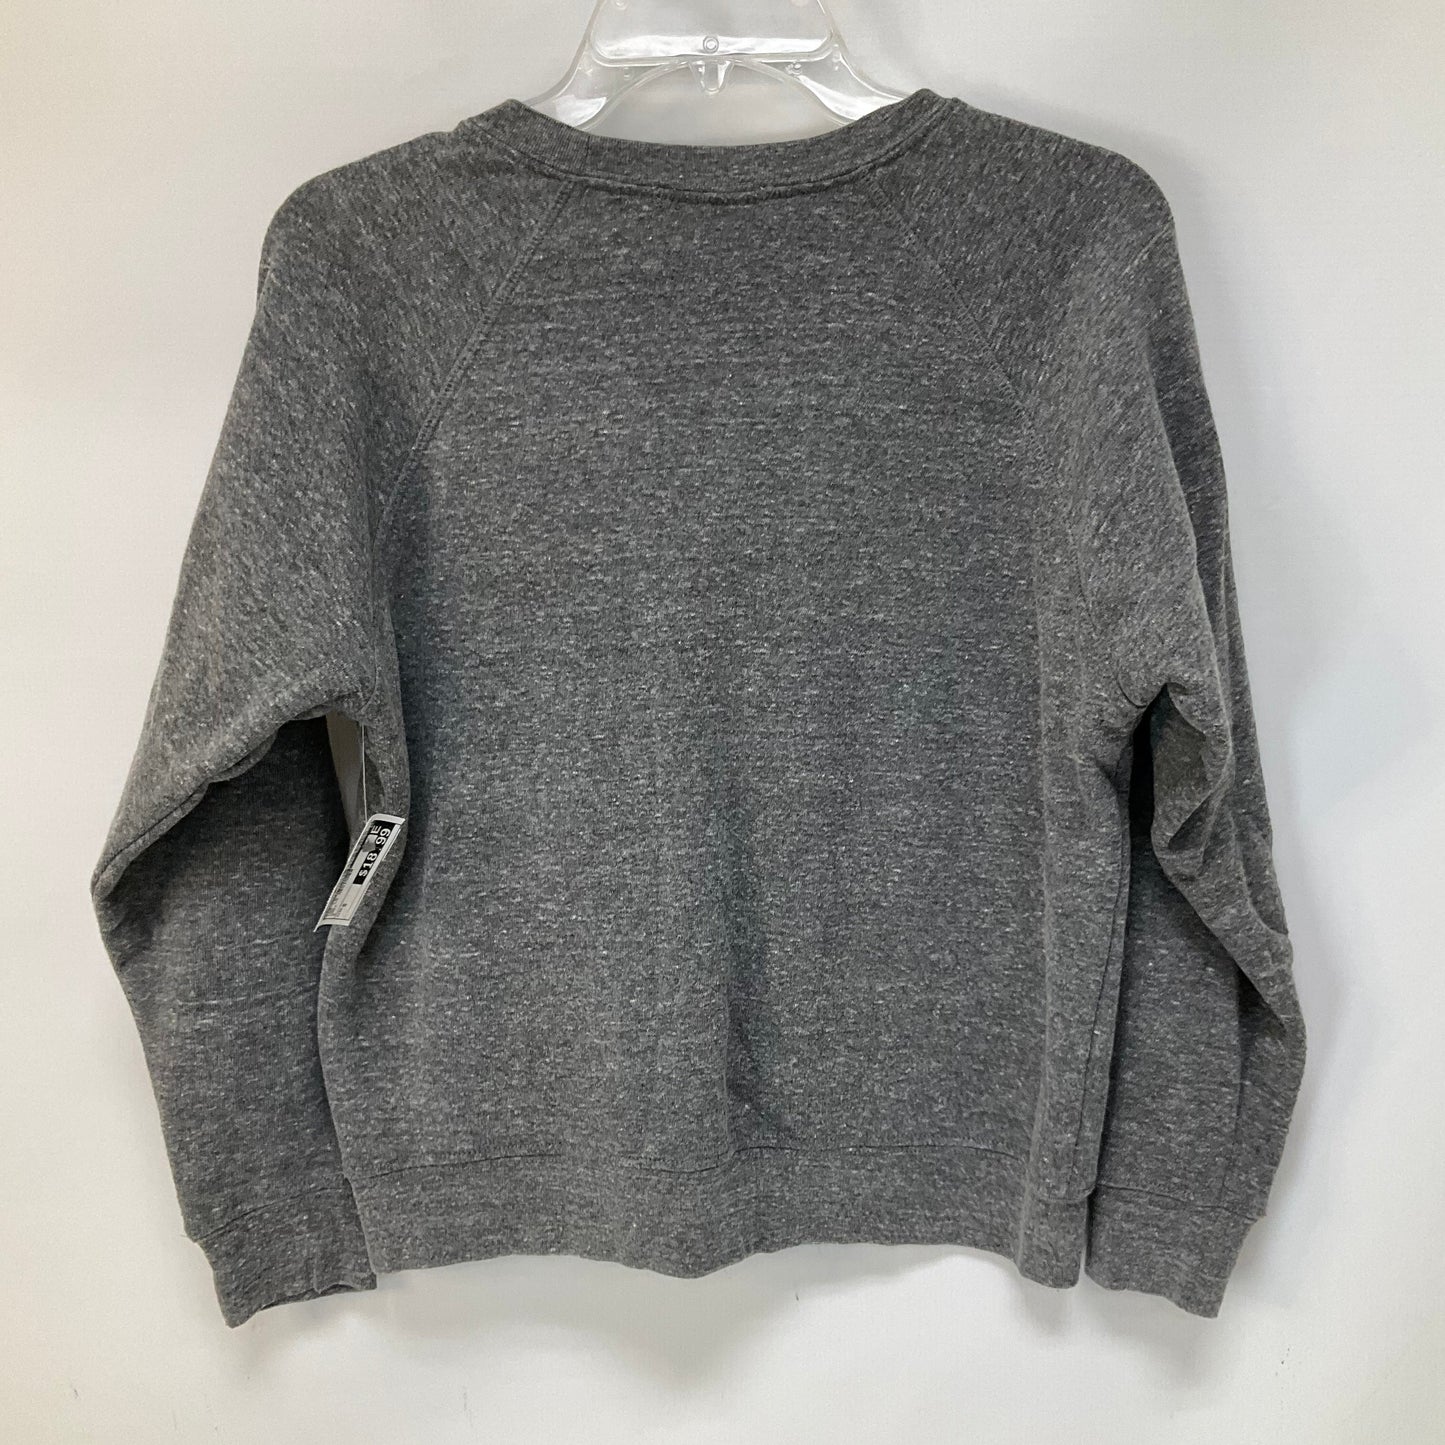 Top Long Sleeve Designer By Rebecca Minkoff  Size: S